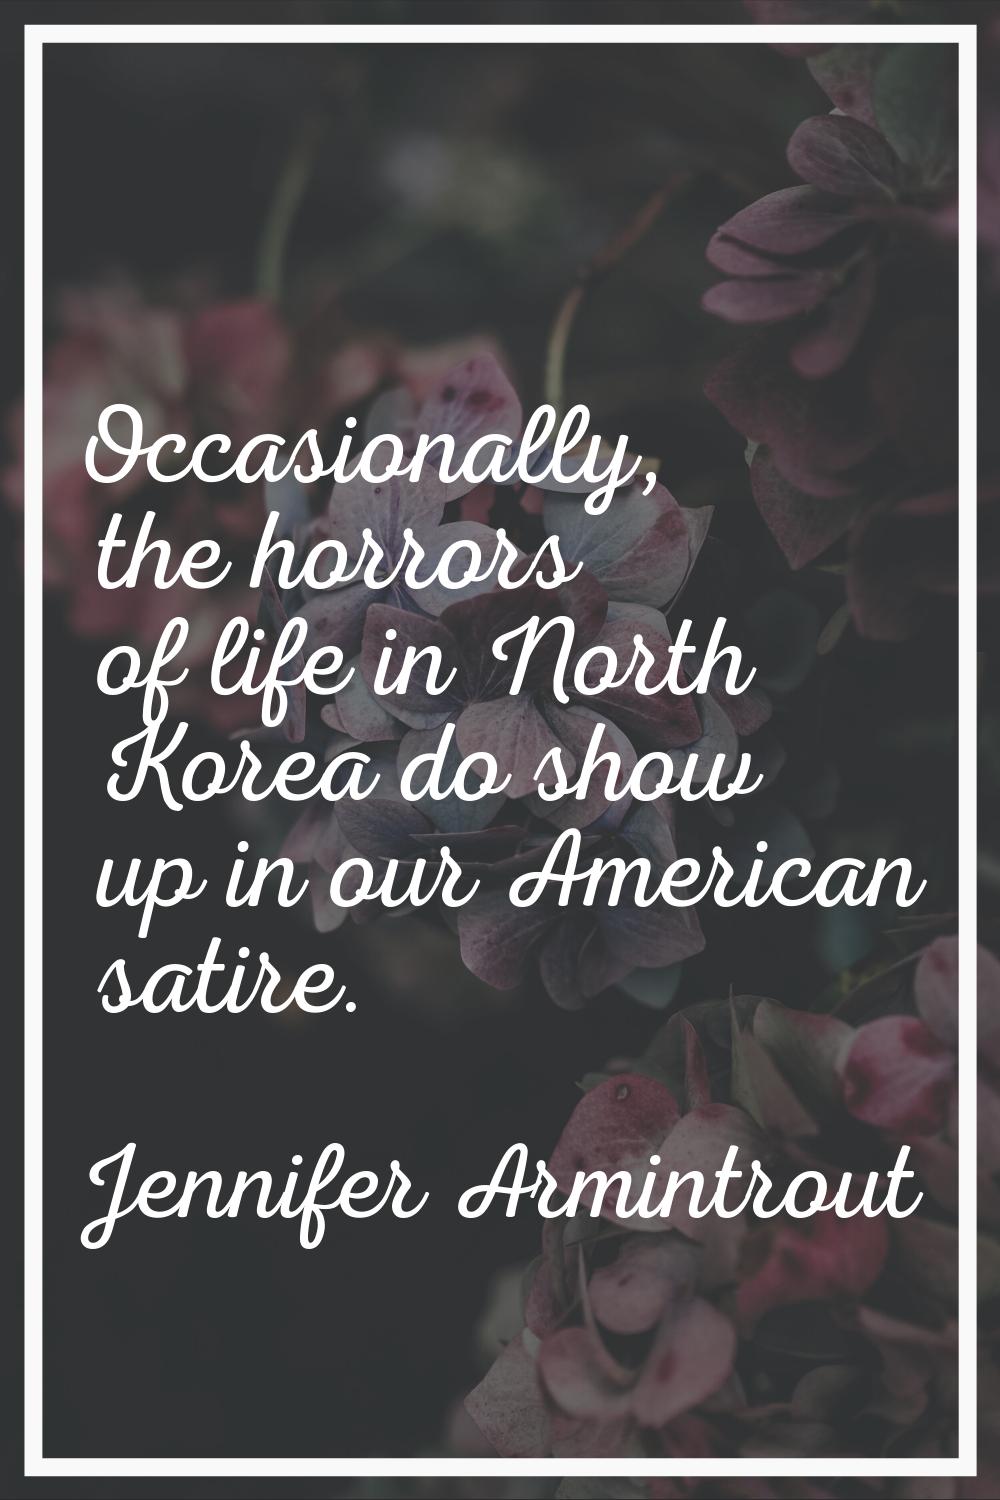 Occasionally, the horrors of life in North Korea do show up in our American satire.